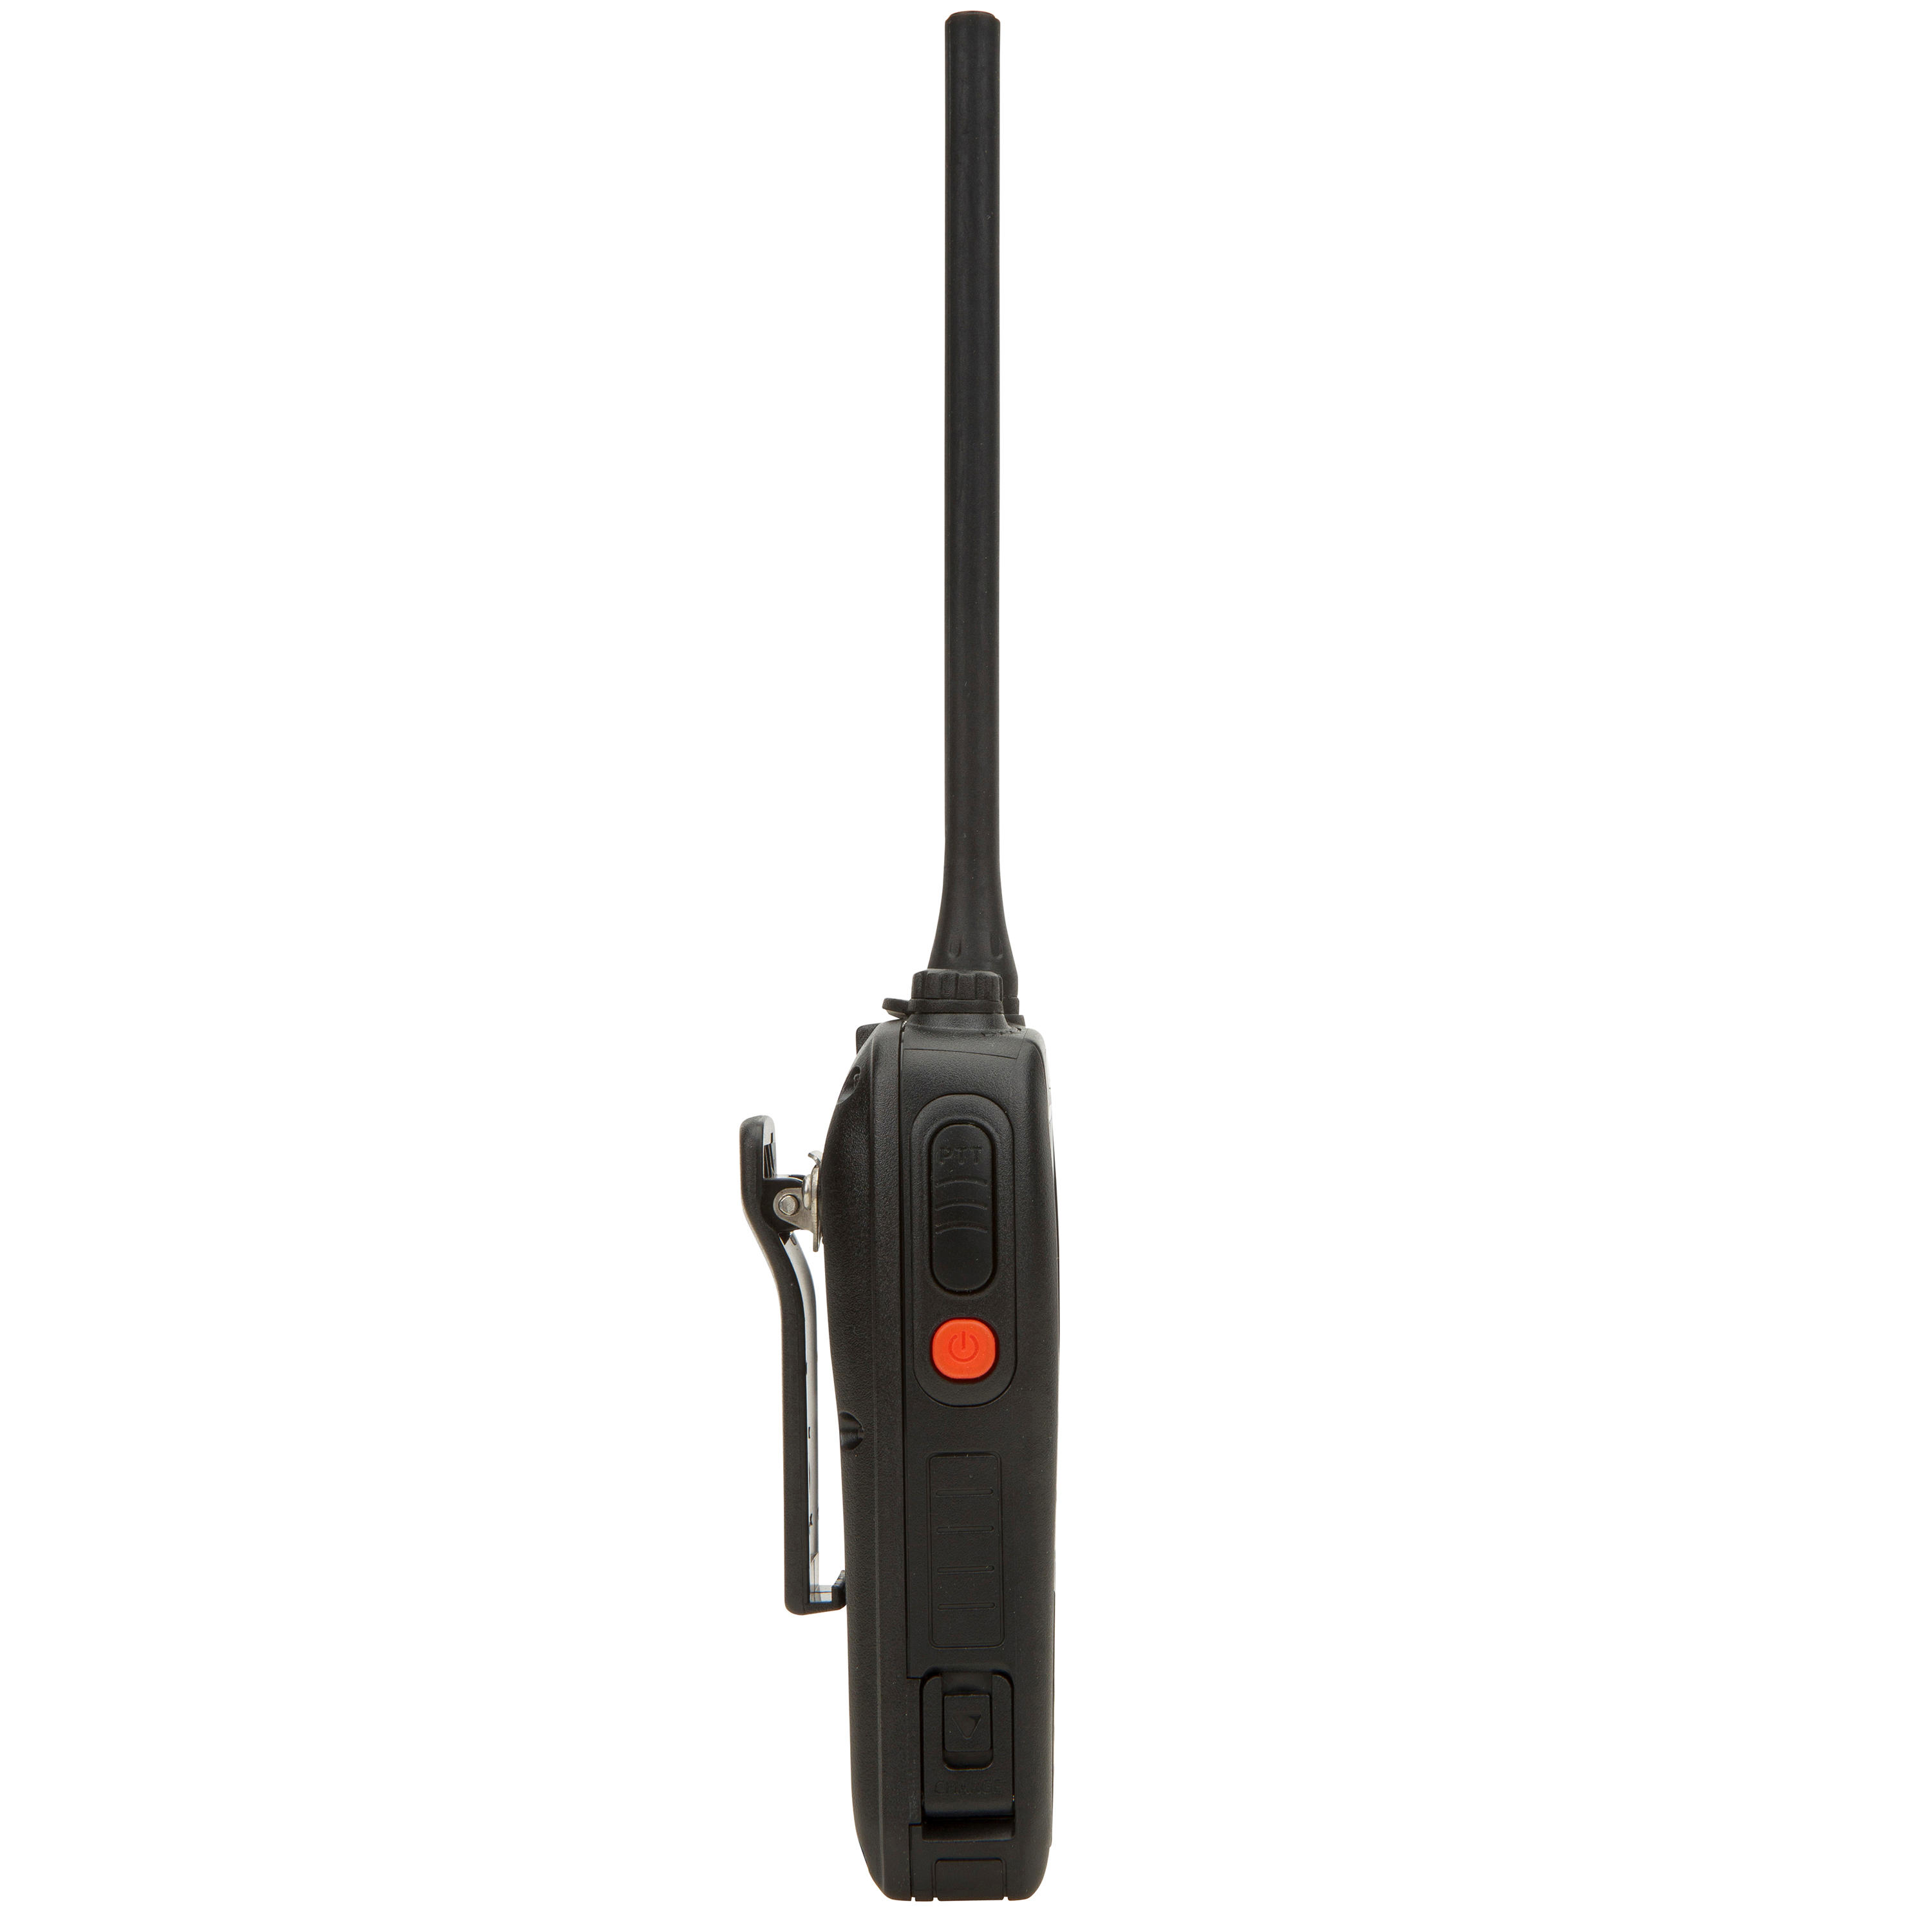 FLOATING VHF SX-400, WATERPROOF to IPX7 with flash and alarm 3/6